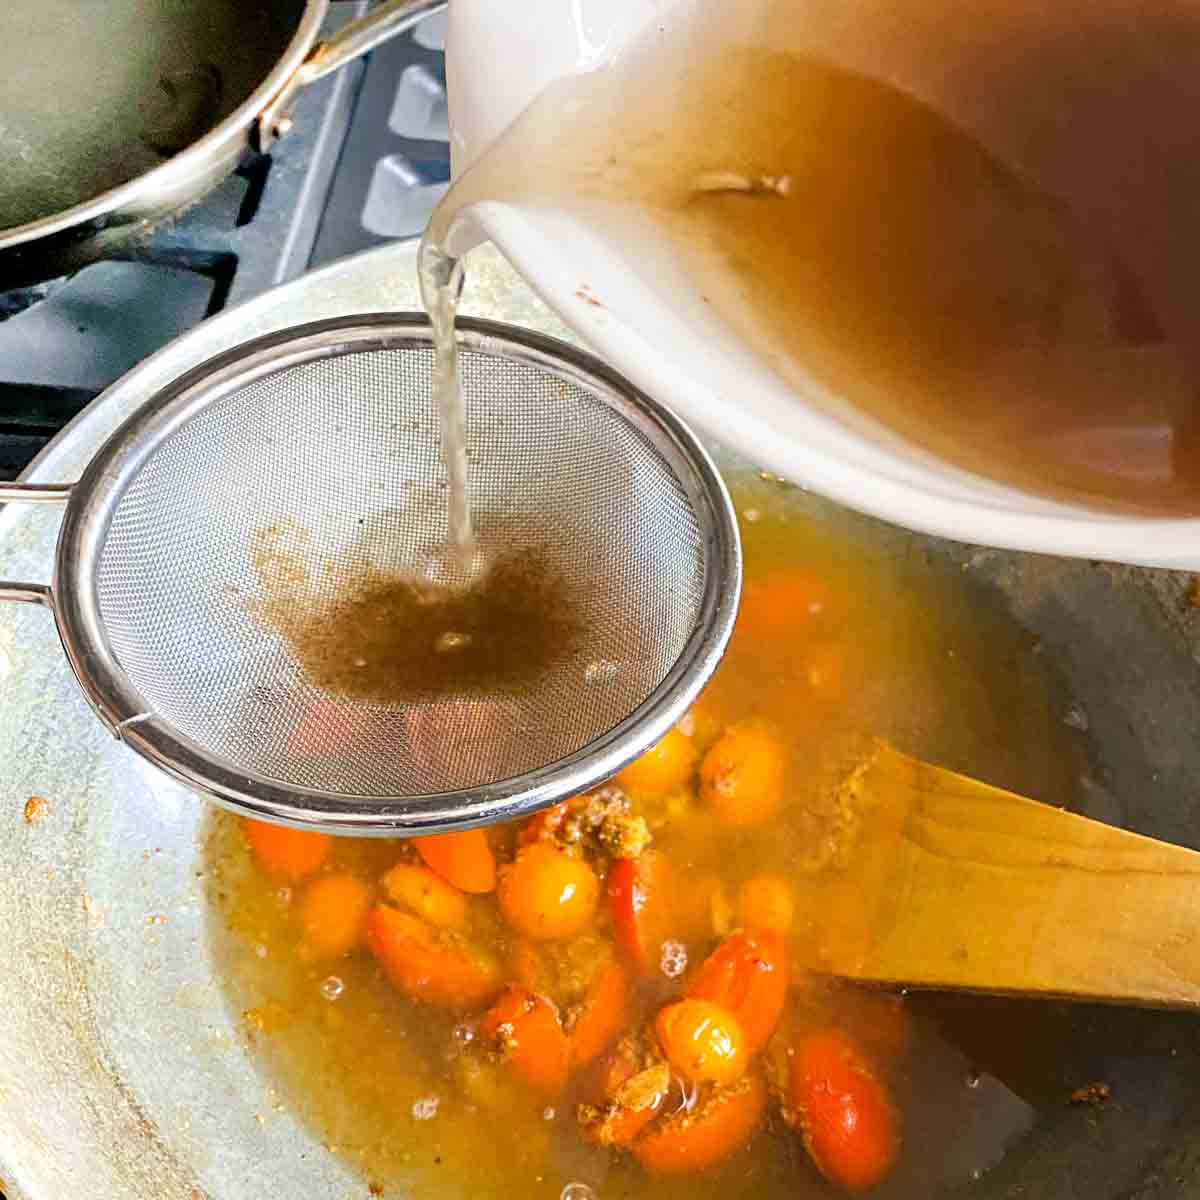 The tamarind water is being strained into the pot of rasam